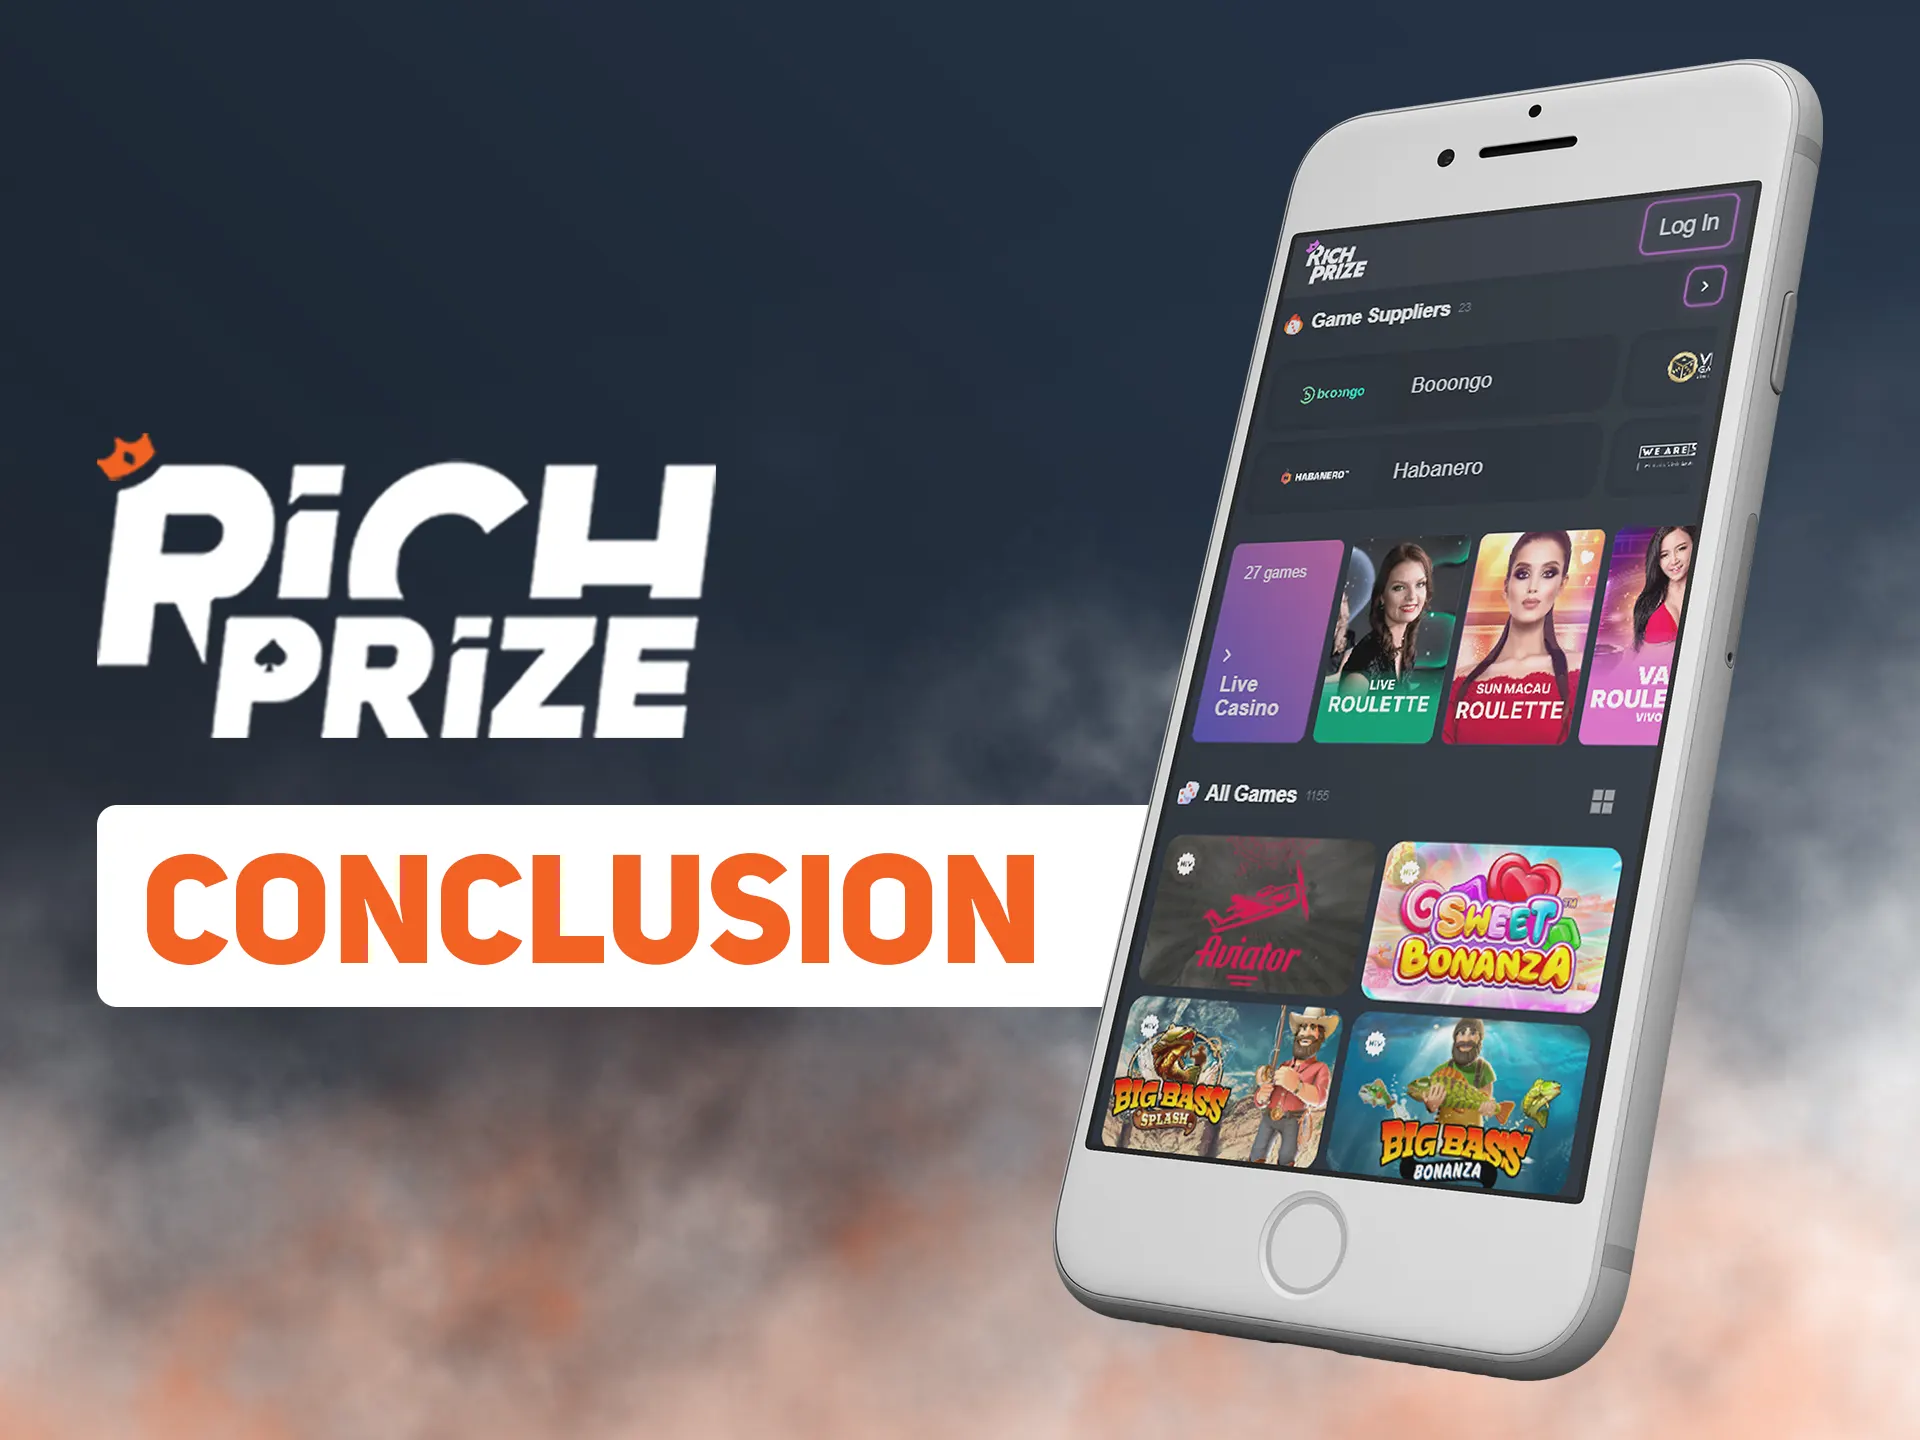 Richprize app is convinient addition to main site.